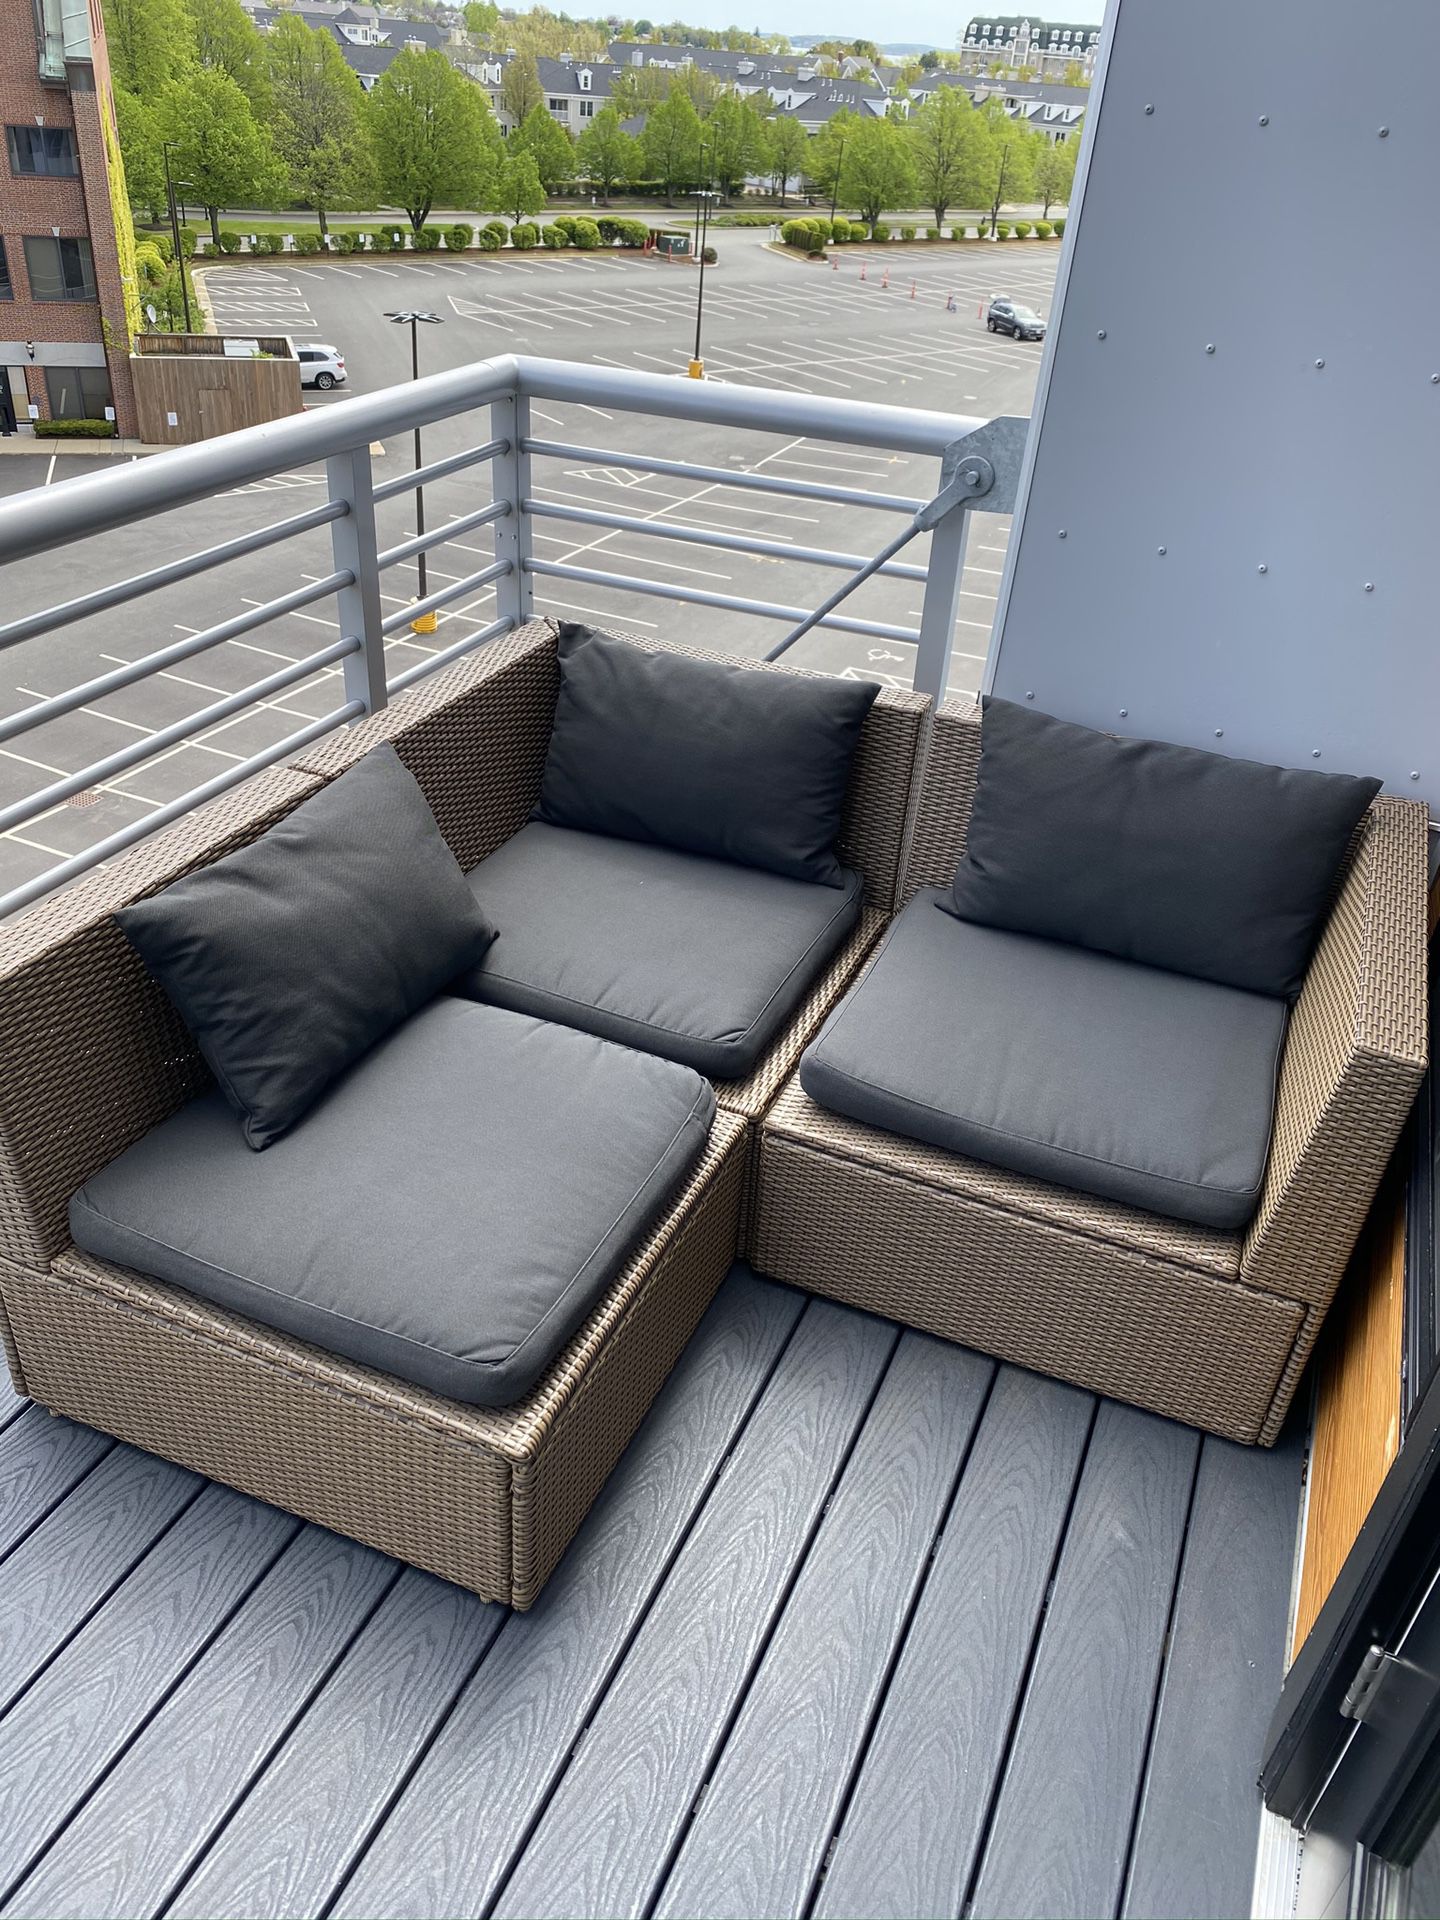 MUST GO! Outdoor Patio Furniture Sectional 3 piece